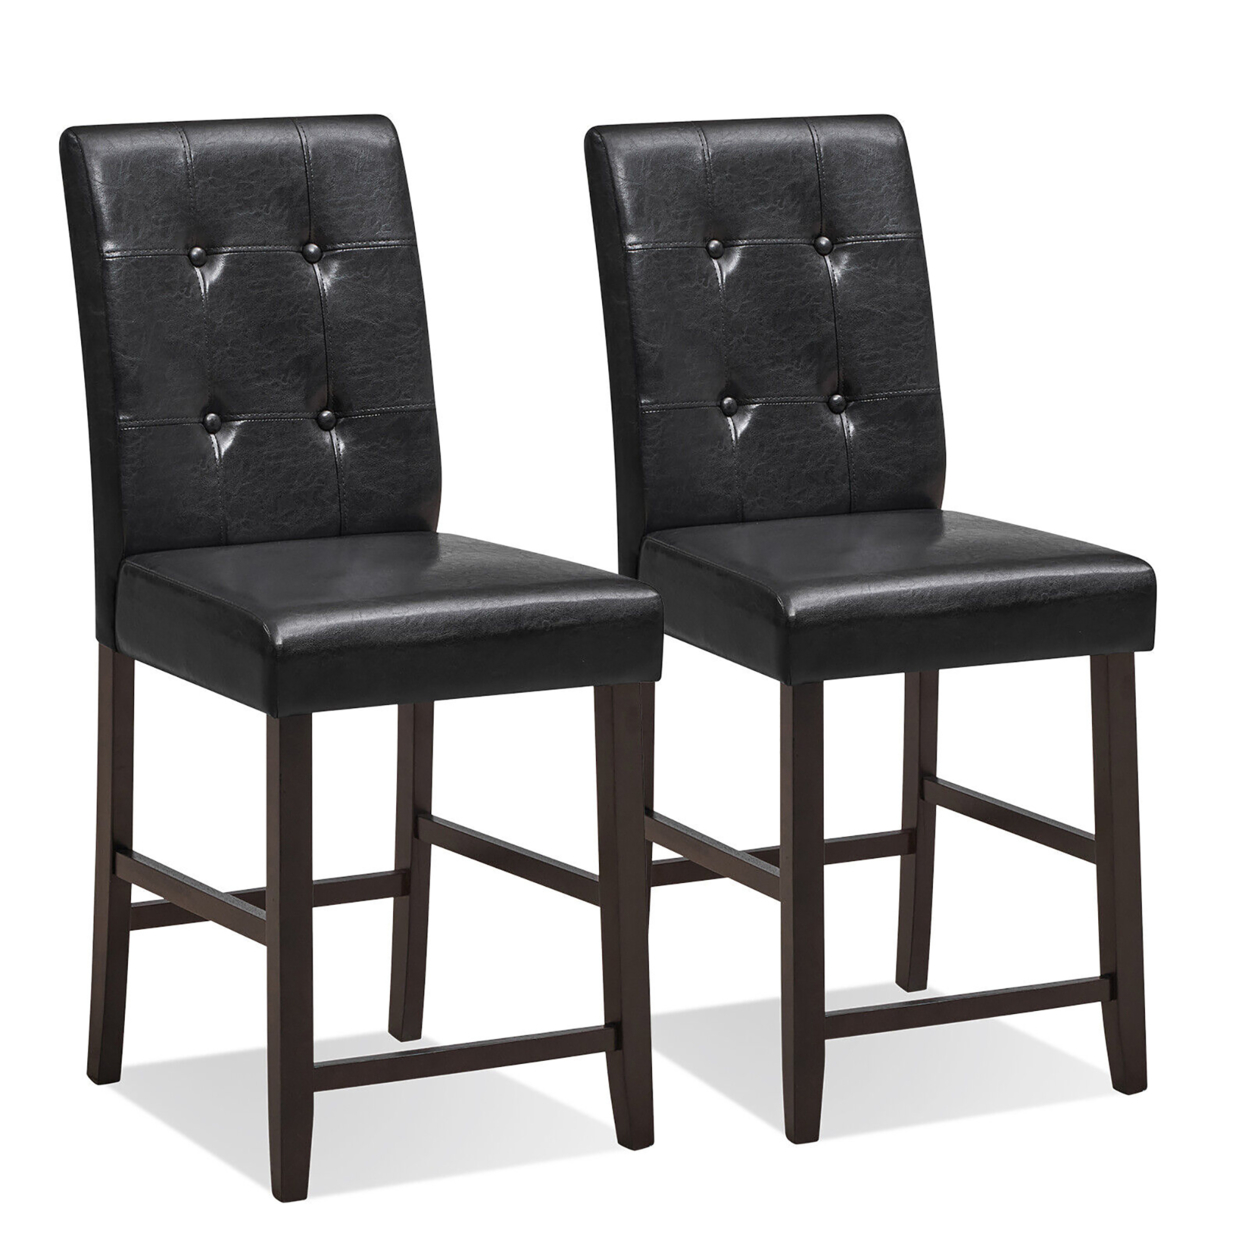 Set Of 2 Bar Stools Tufted Counter Height Pub Kitchen Chairs W/ Rubber Wood Legs